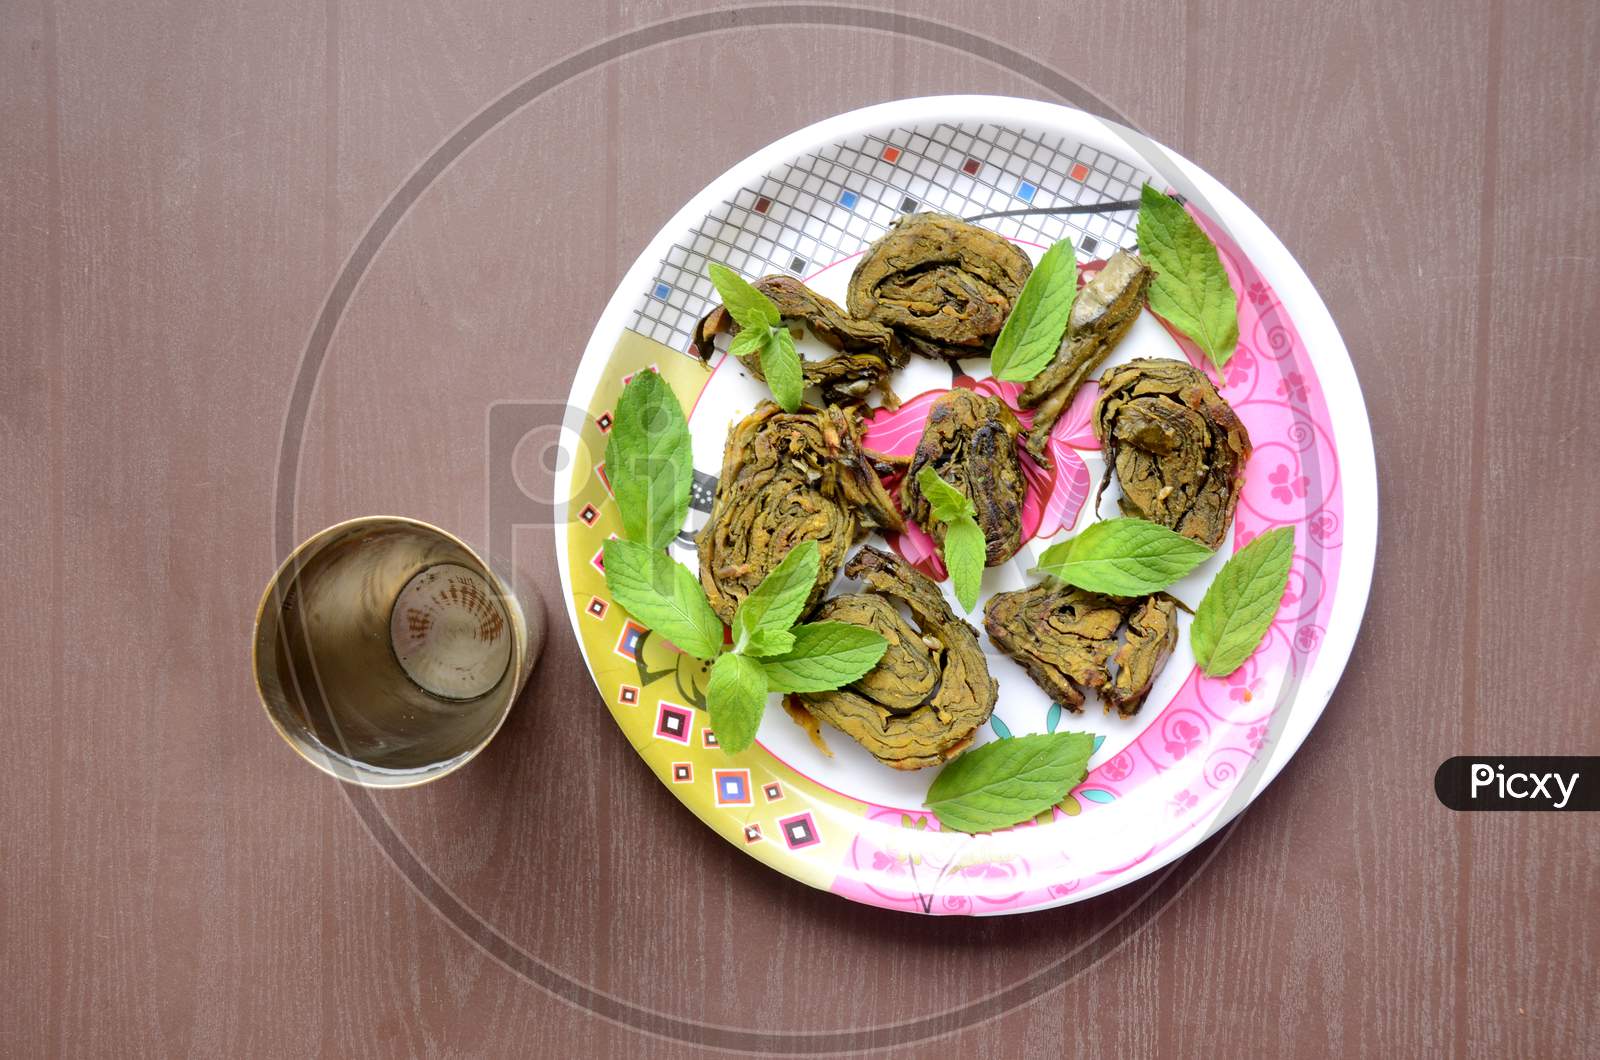 Closeup The Fried Arabic Leaves Food With Green Mint In The Plate And Water Brass Glass Over Out Of Focus Brown Background.